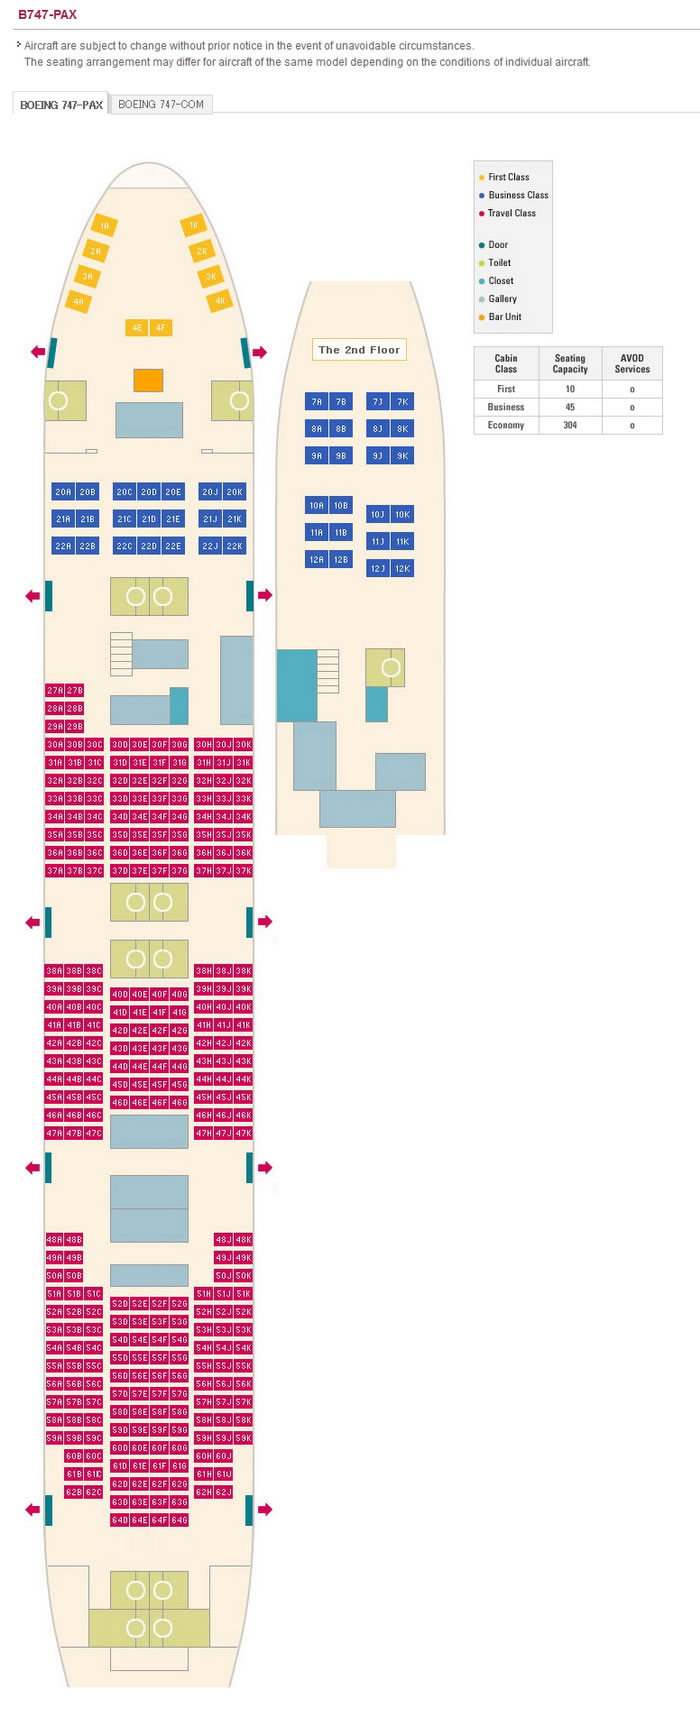 ASIANA AIRLINES BOEING 747-PAX AIRCRAFT SEATING CHART